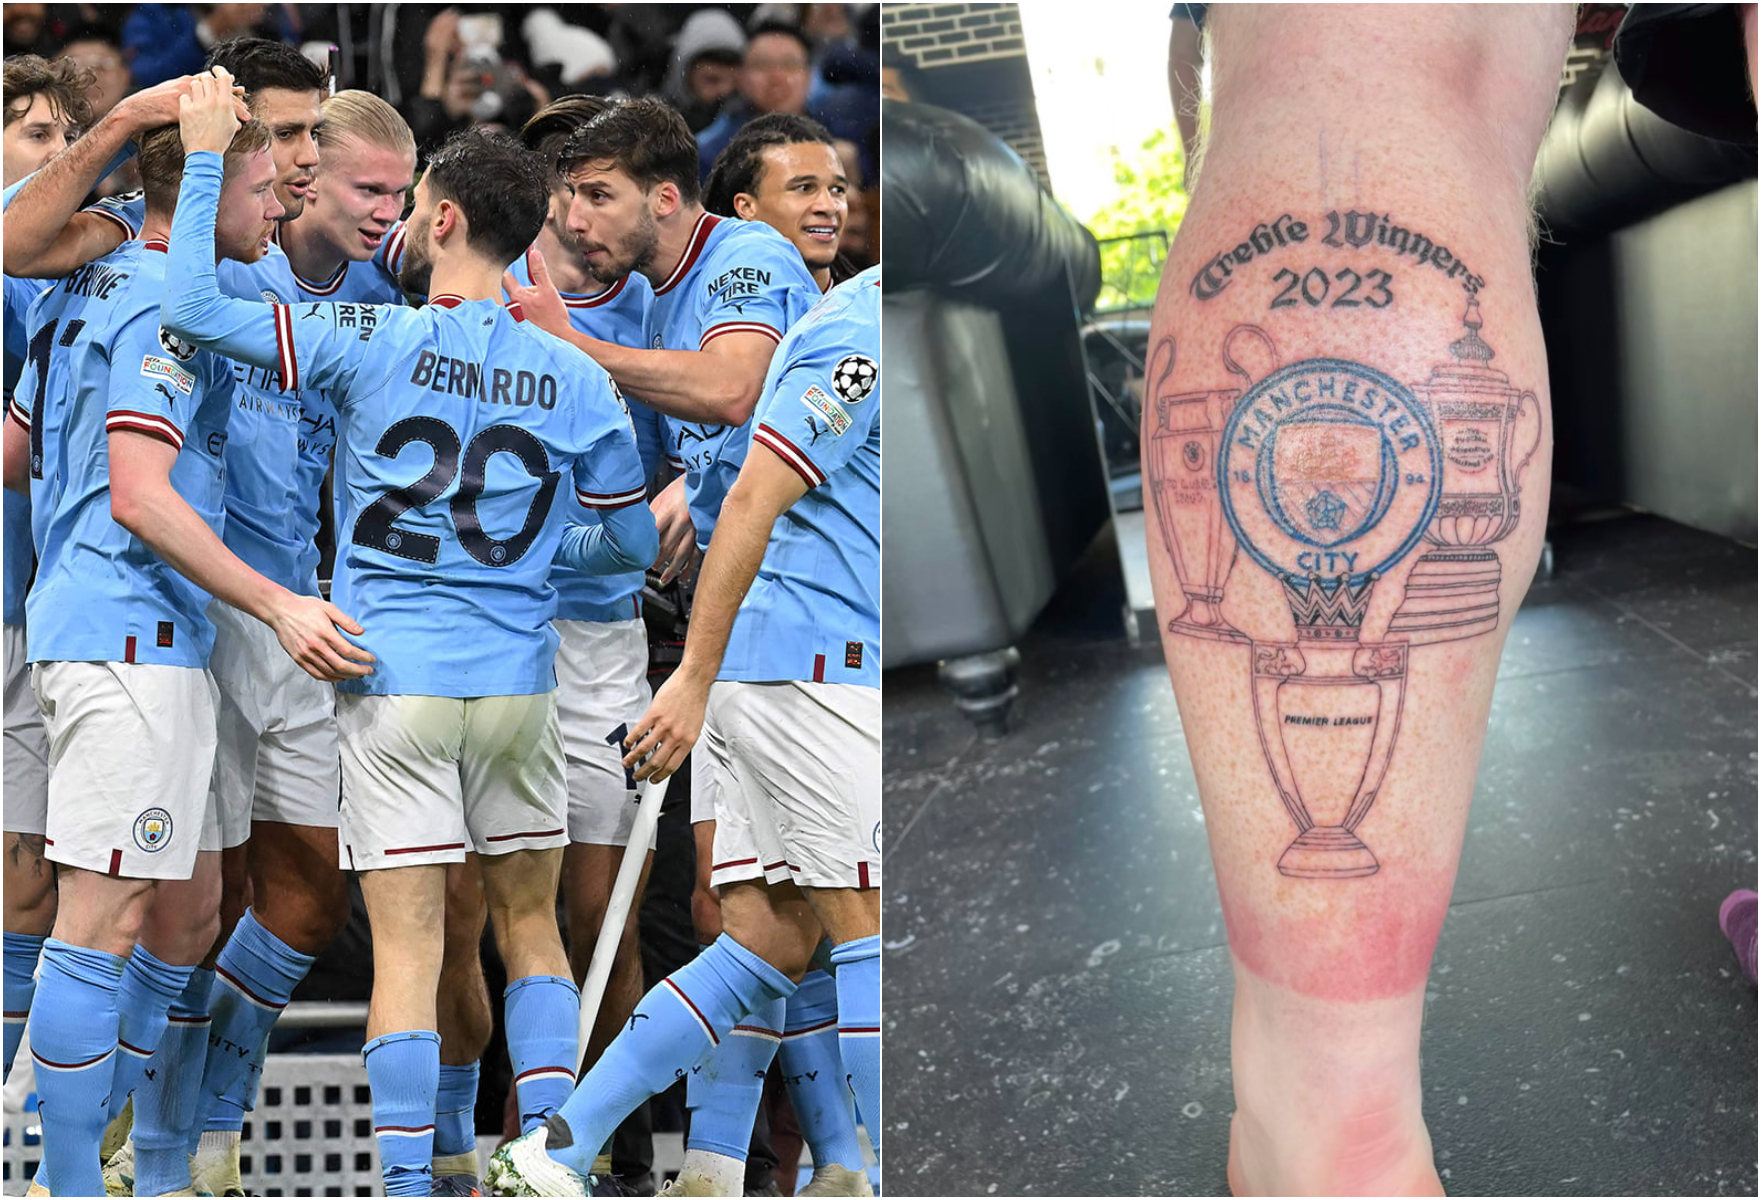 Sergio Ramos unveils tattoos of Champions League and World Cup trophies   Daily Mail Online